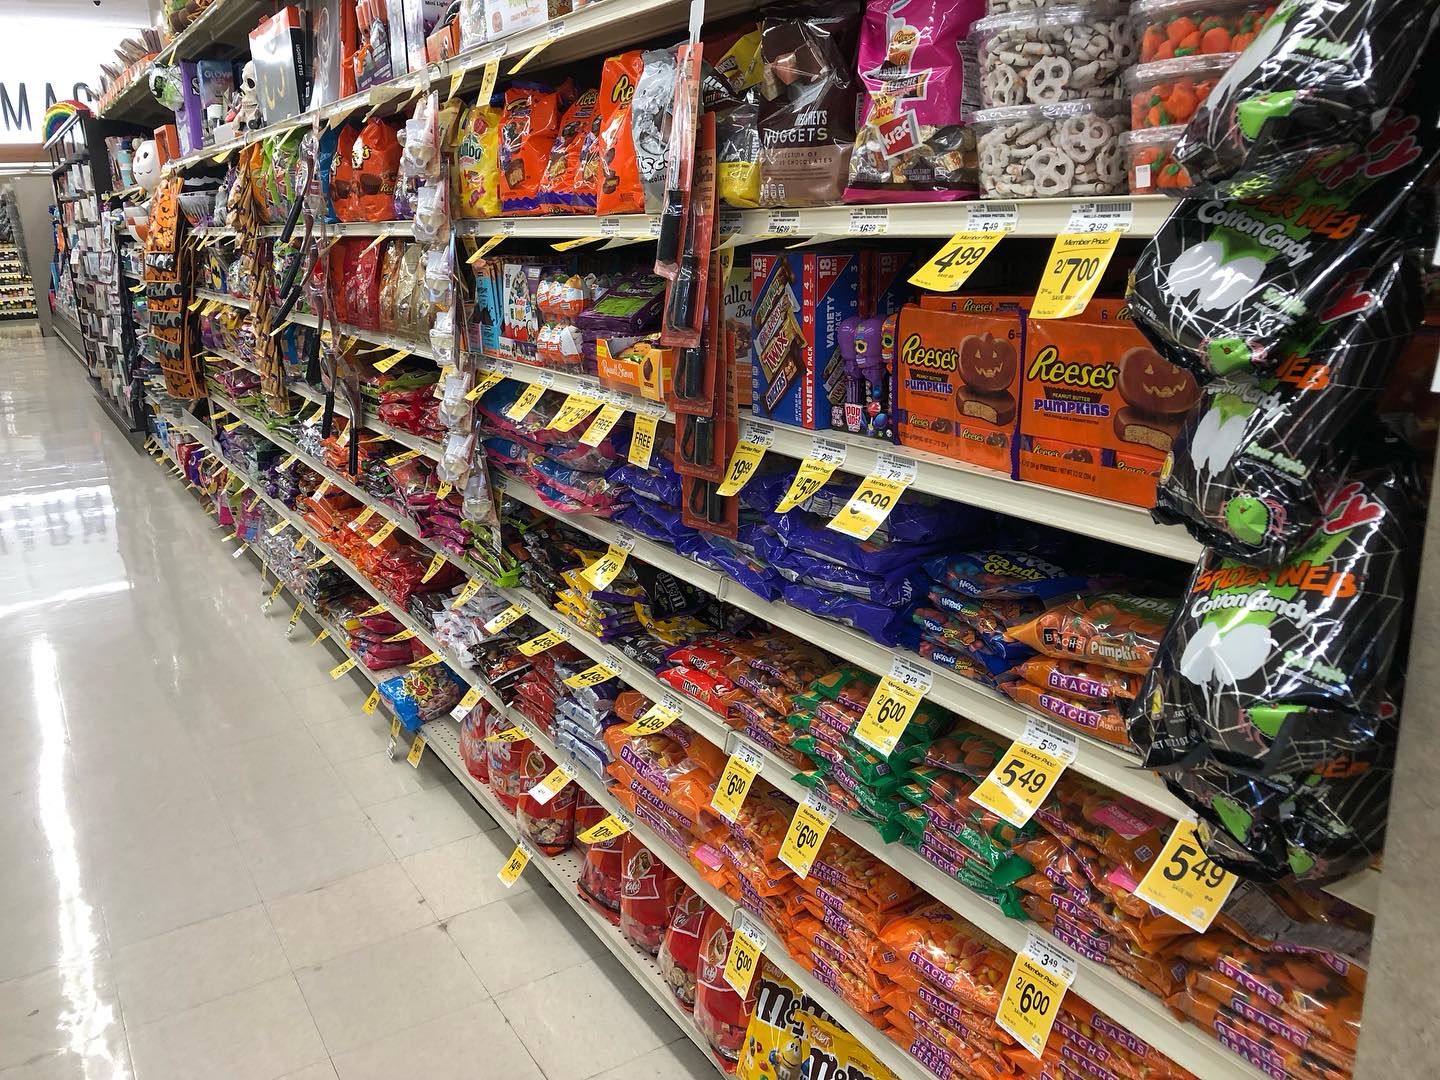 Halloween candy galore!